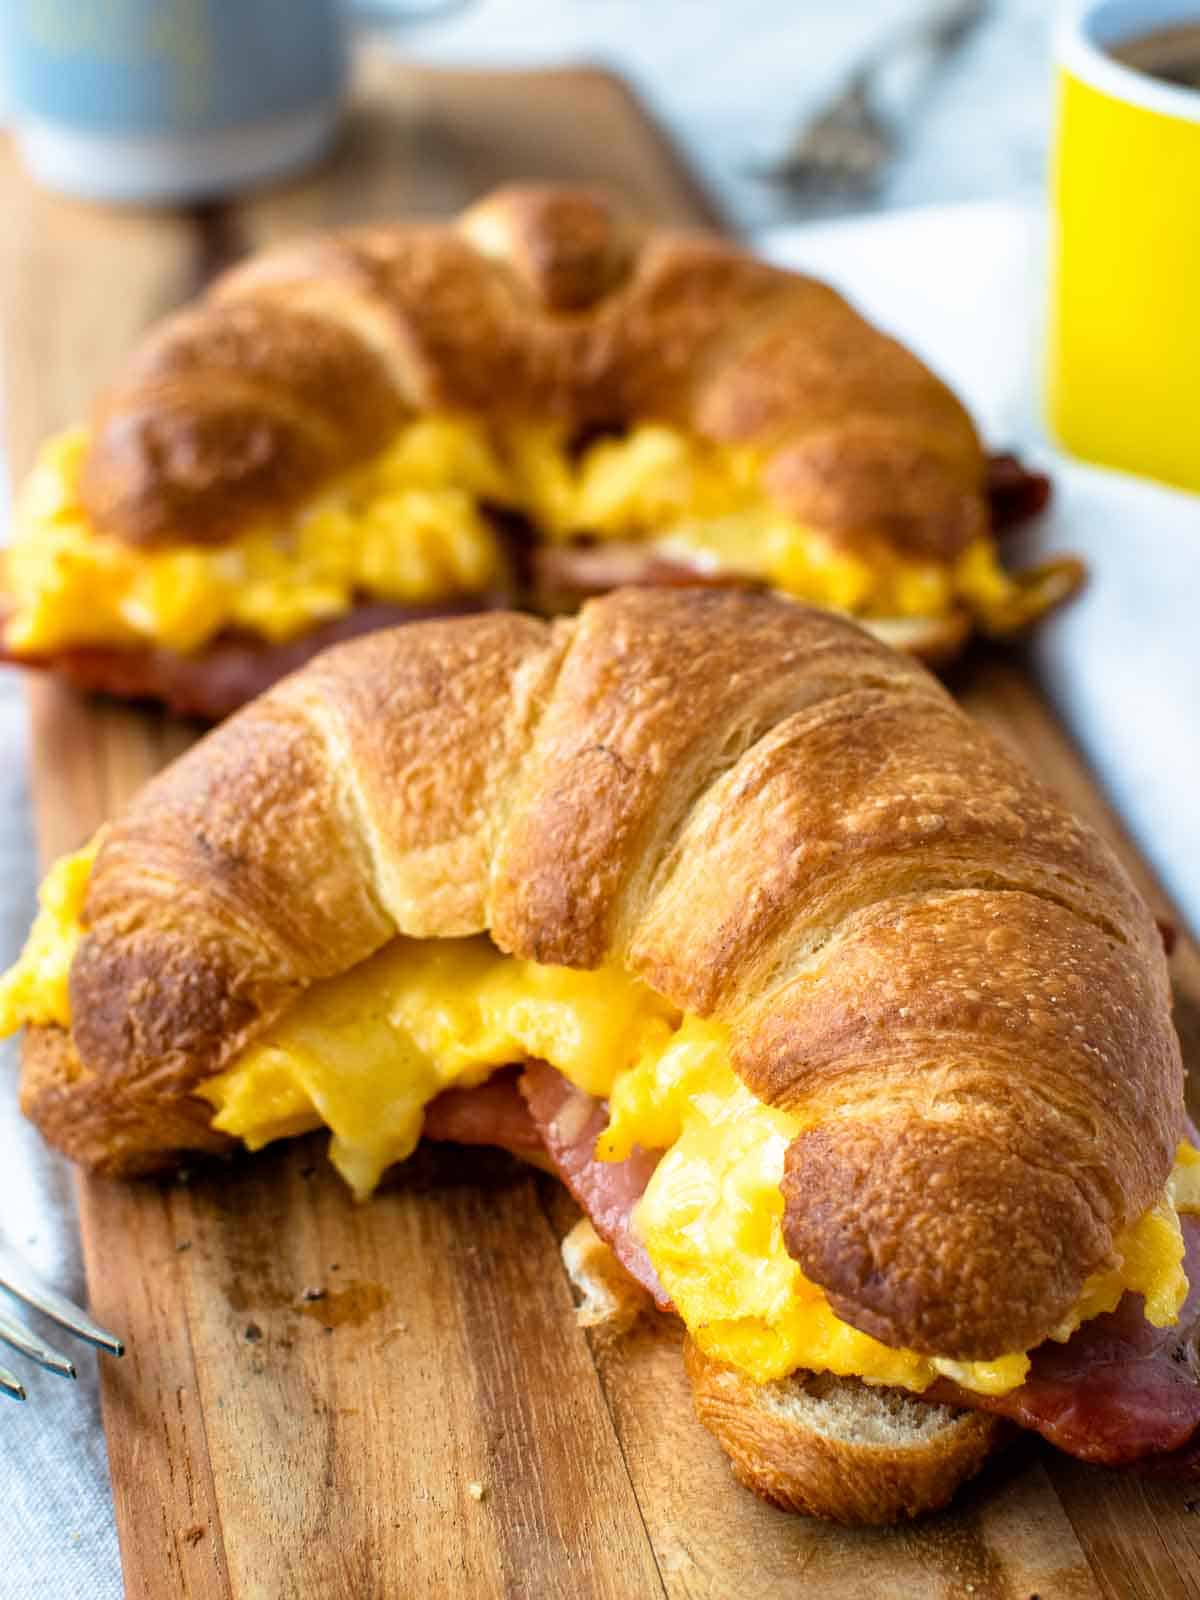 Two bacon egg and cheese croissants on a wooden board with cups in the background.